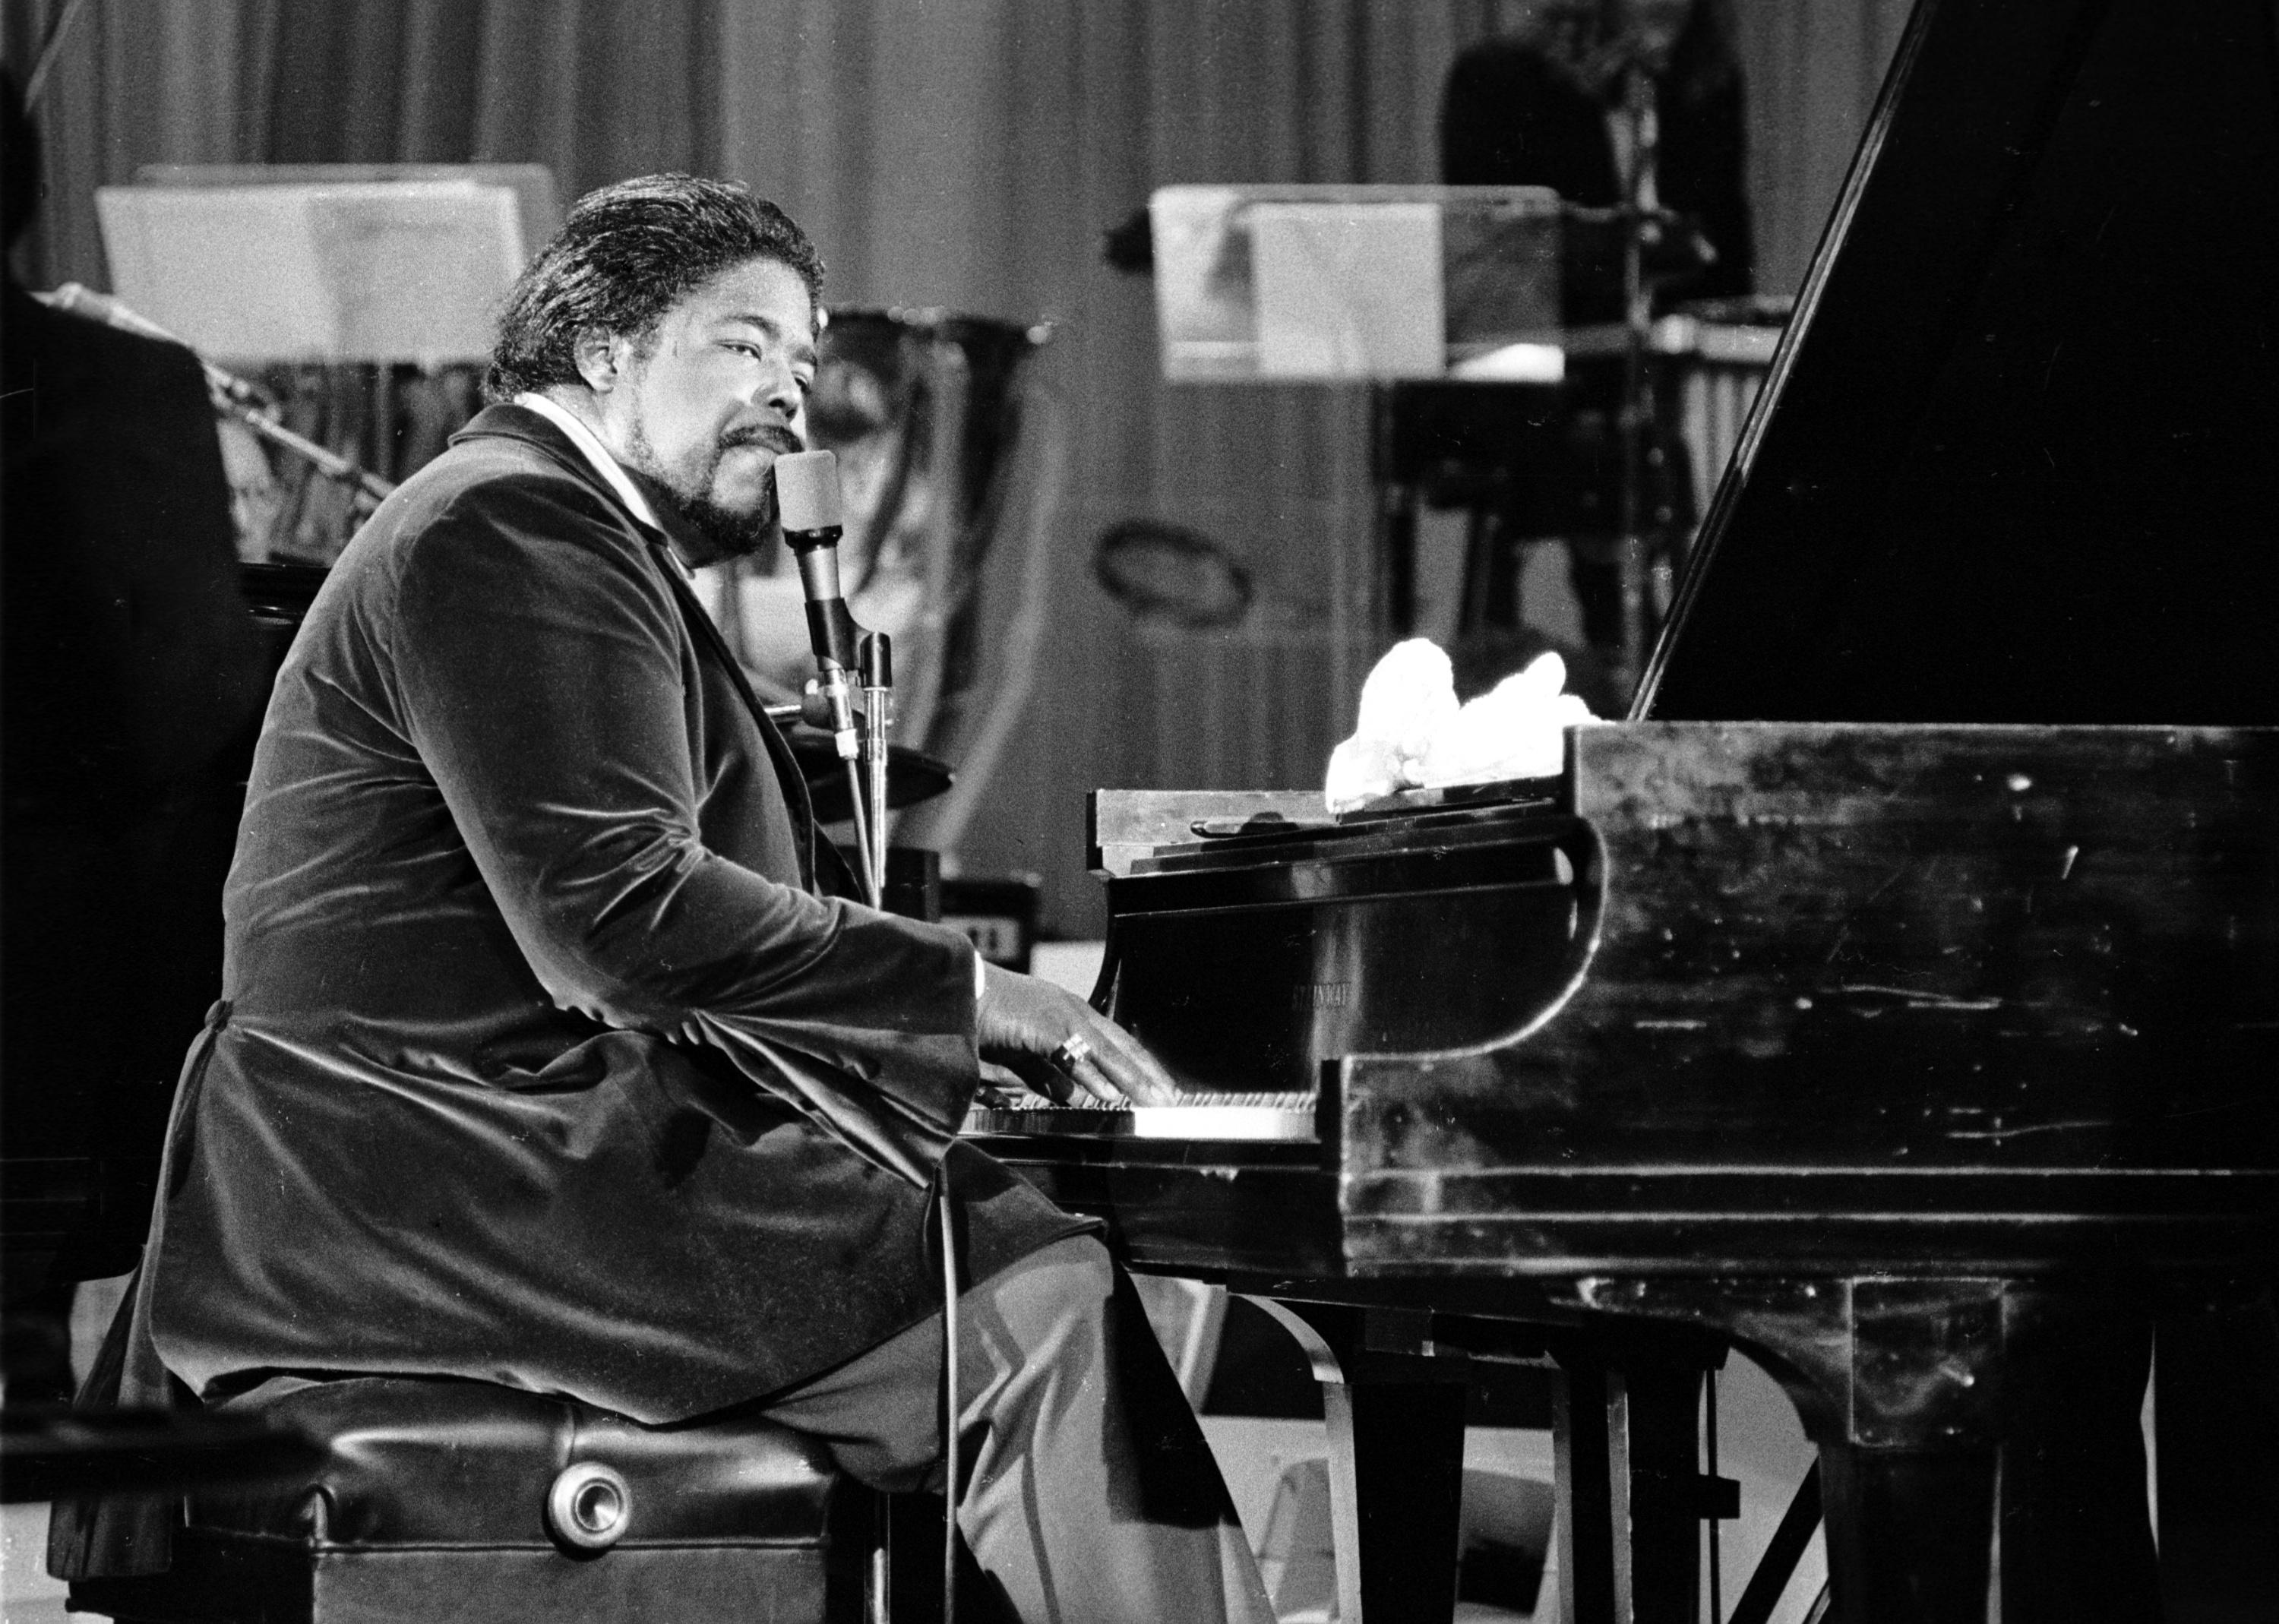 Barry White at a piano with microphone.